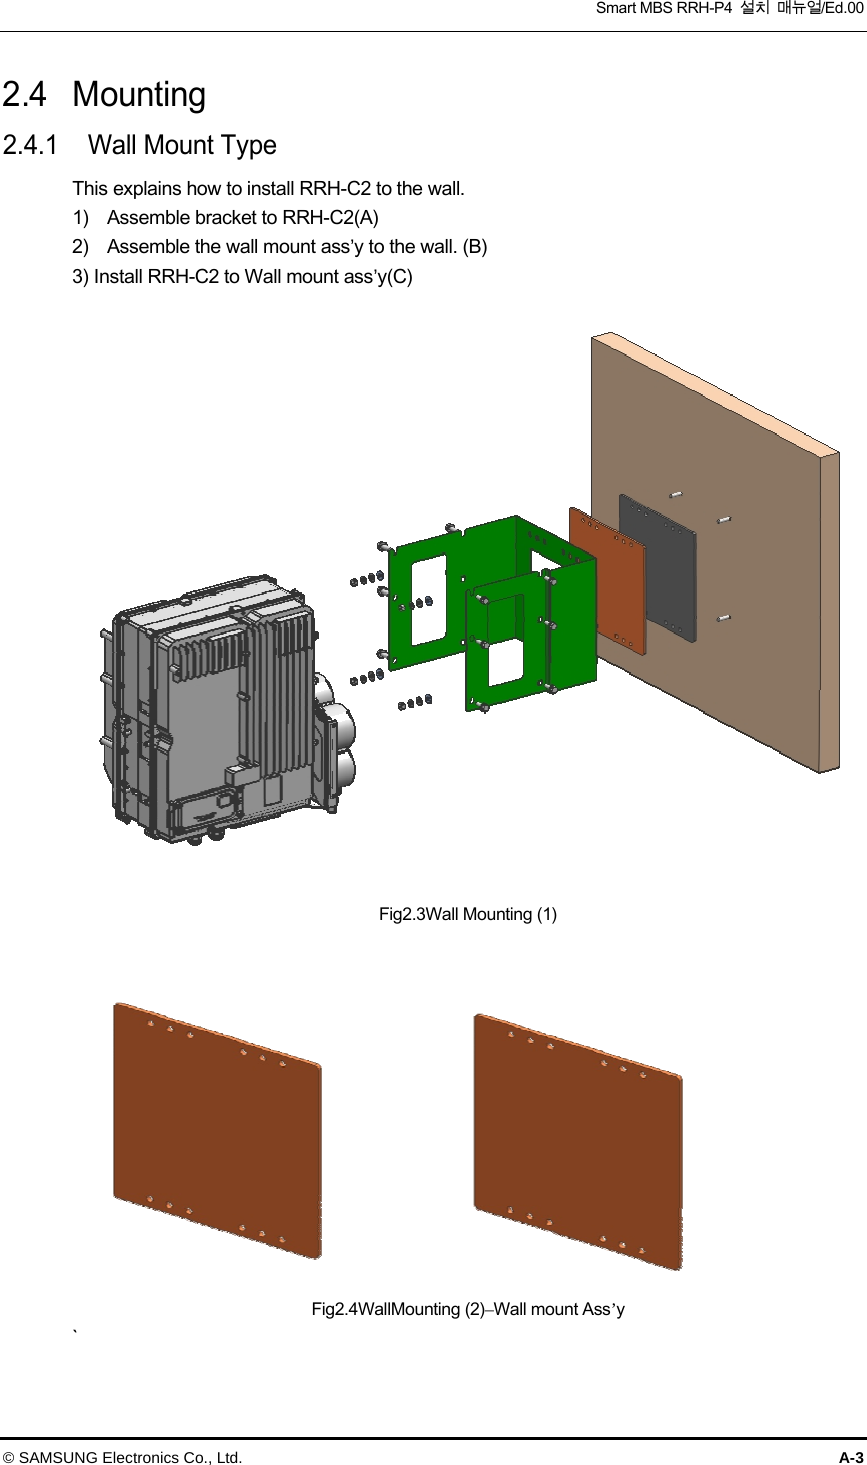  Smart MBS RRH-P4  설치  매뉴얼/Ed.00 © SAMSUNG Electronics Co., Ltd.  A-3 2.4  Mounting 2.4.1  Wall Mount Type This explains how to install RRH-C2 to the wall. 1)    Assemble bracket to RRH-C2(A) 2)    Assemble the wall mount ass’y to the wall. (B) 3) Install RRH-C2 to Wall mount ass’y(C)   Fig2.3Wall Mounting (1)   Fig2.4WallMounting (2)–Wall mount Ass’y `